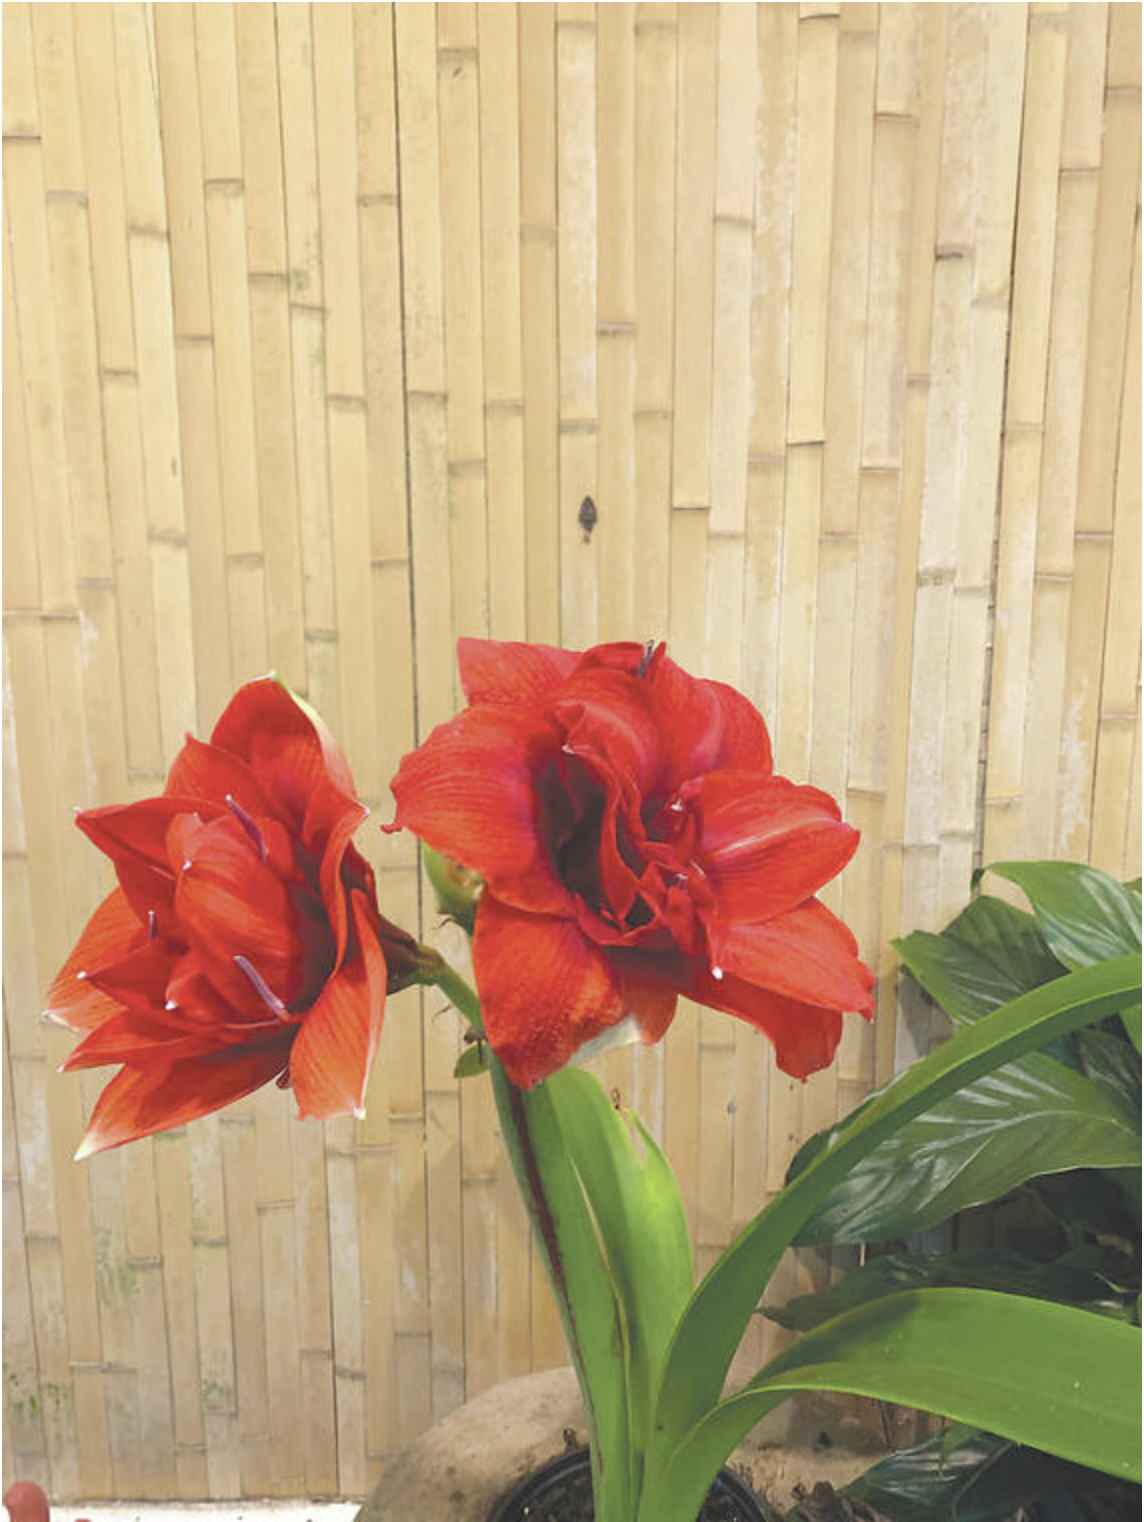 Hybrid amaryllis may be found at local garden shops and ordered from mainland catalogs of certified nurseries as well. They come in several shapes and colors.